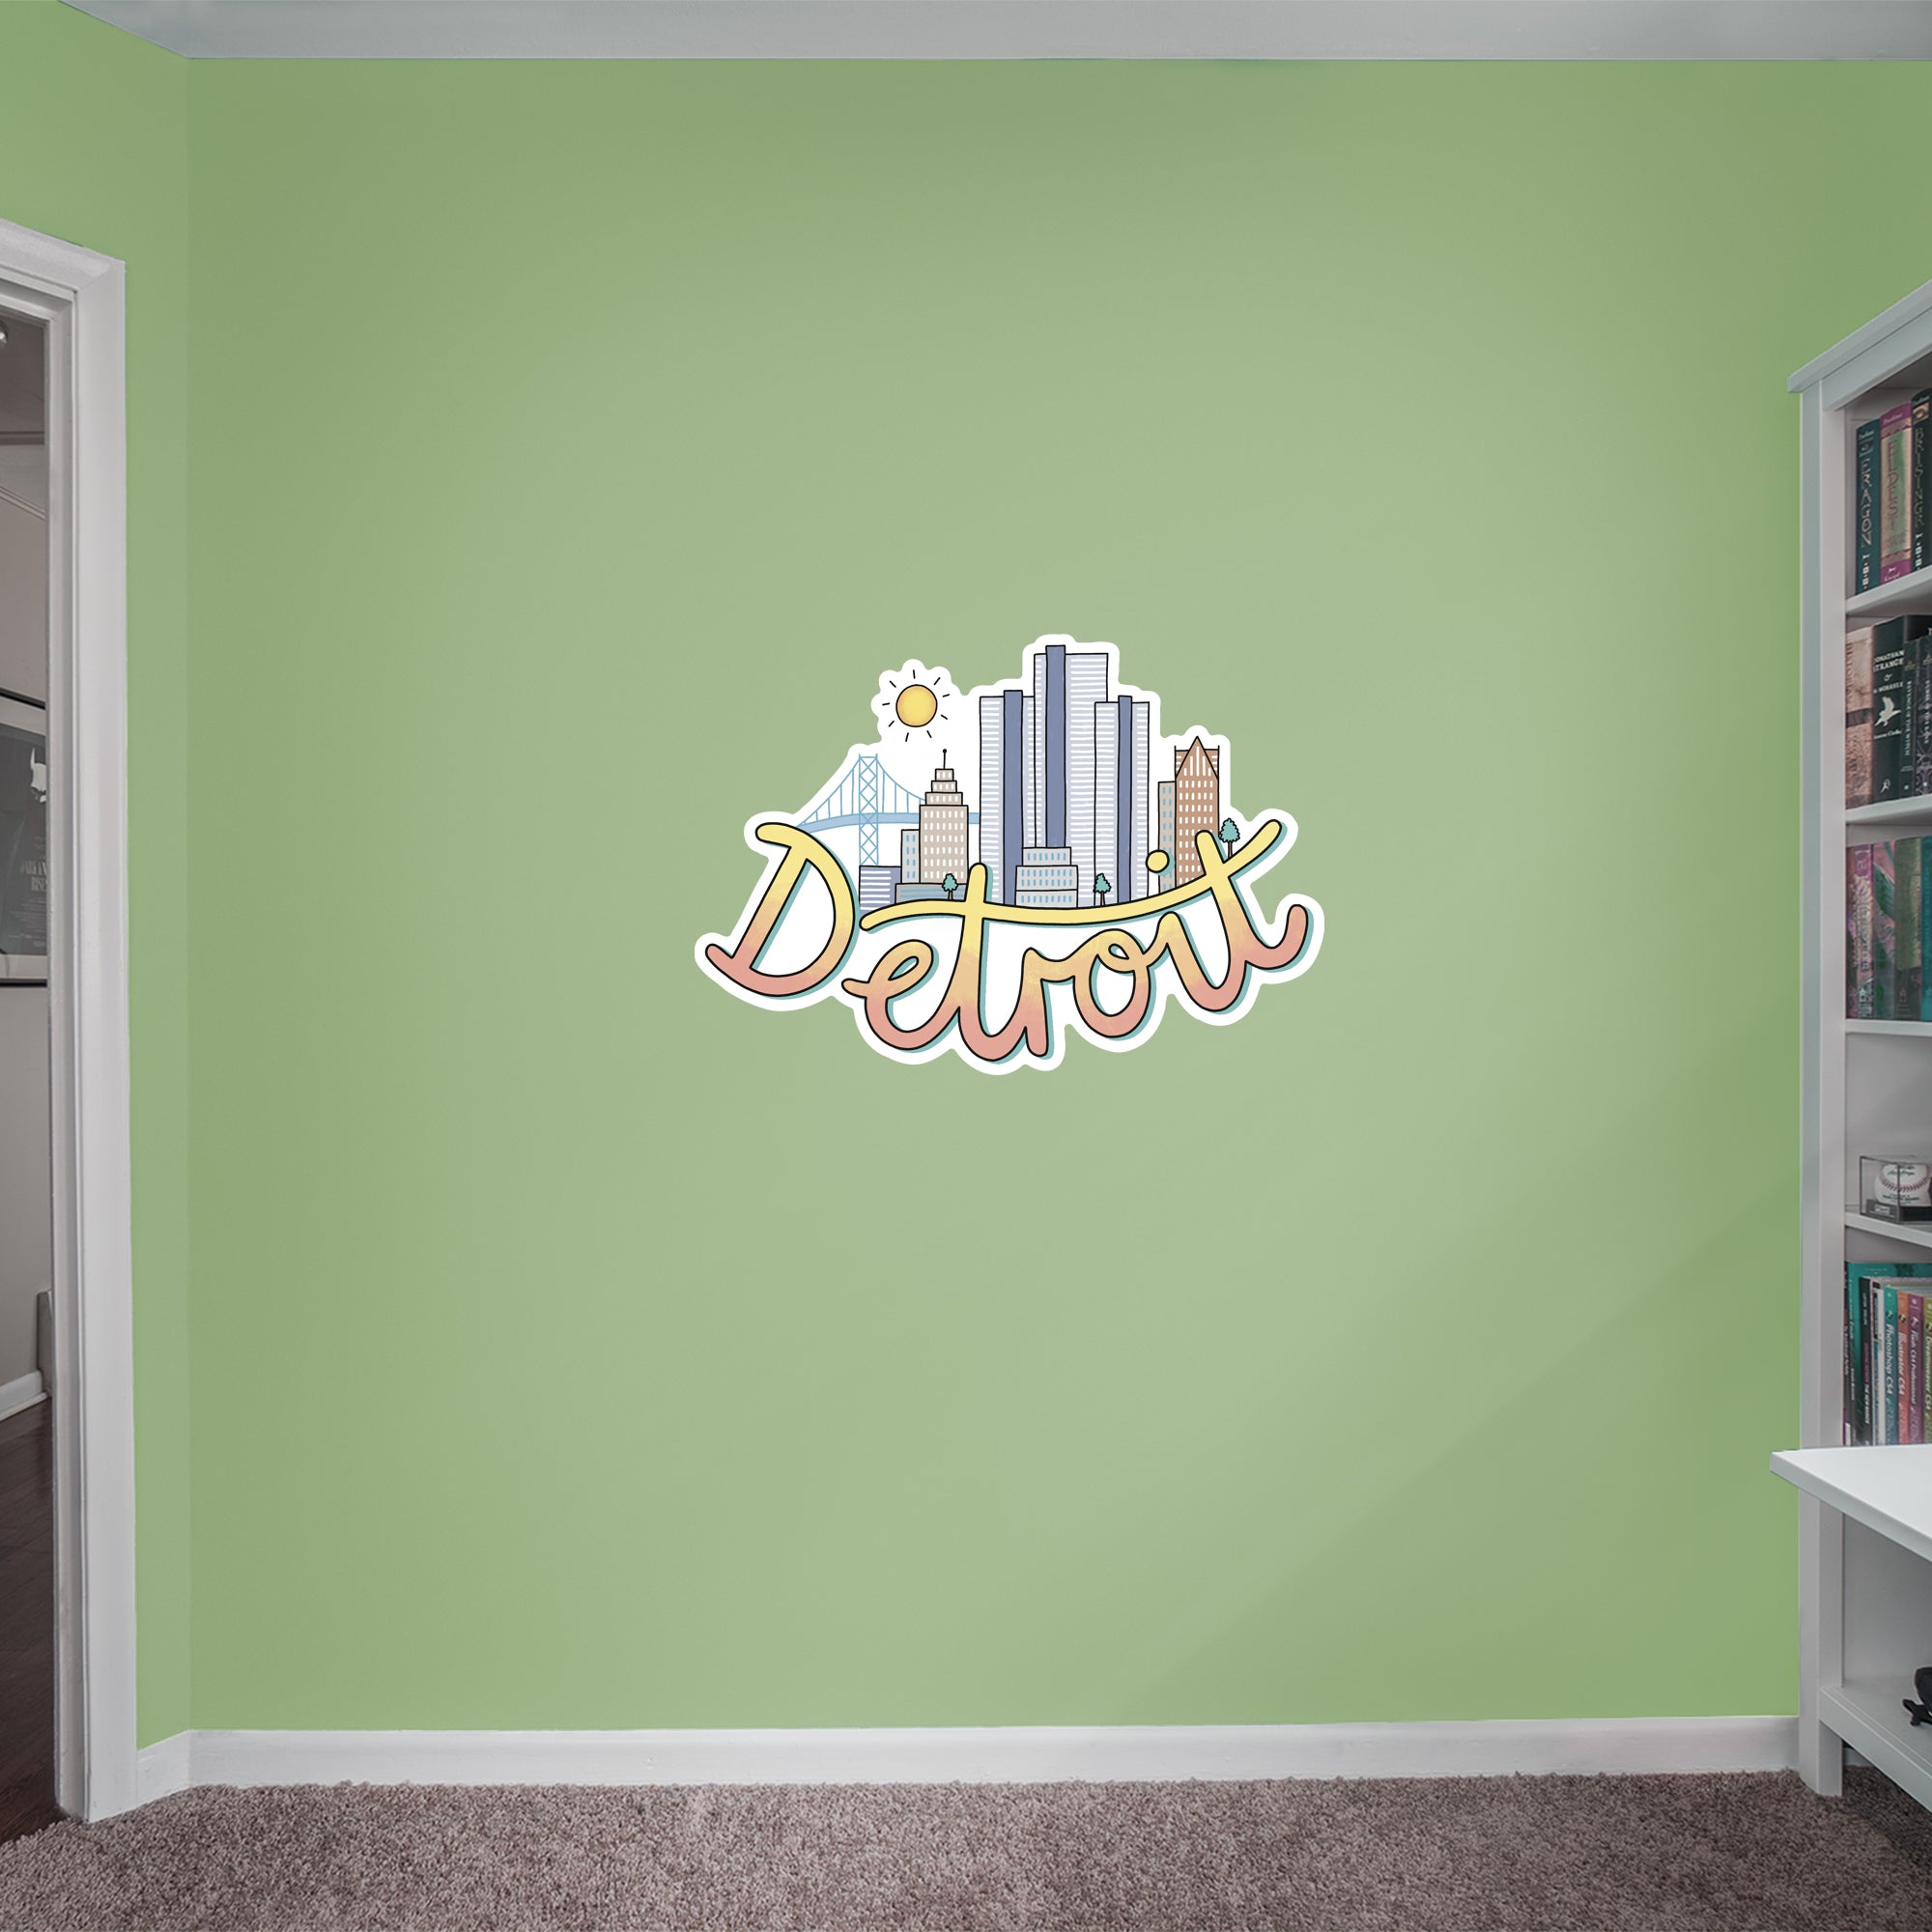 Detroit - Officially Licensed Big Moods Removable Wall Decal XL by Fathead | Vinyl